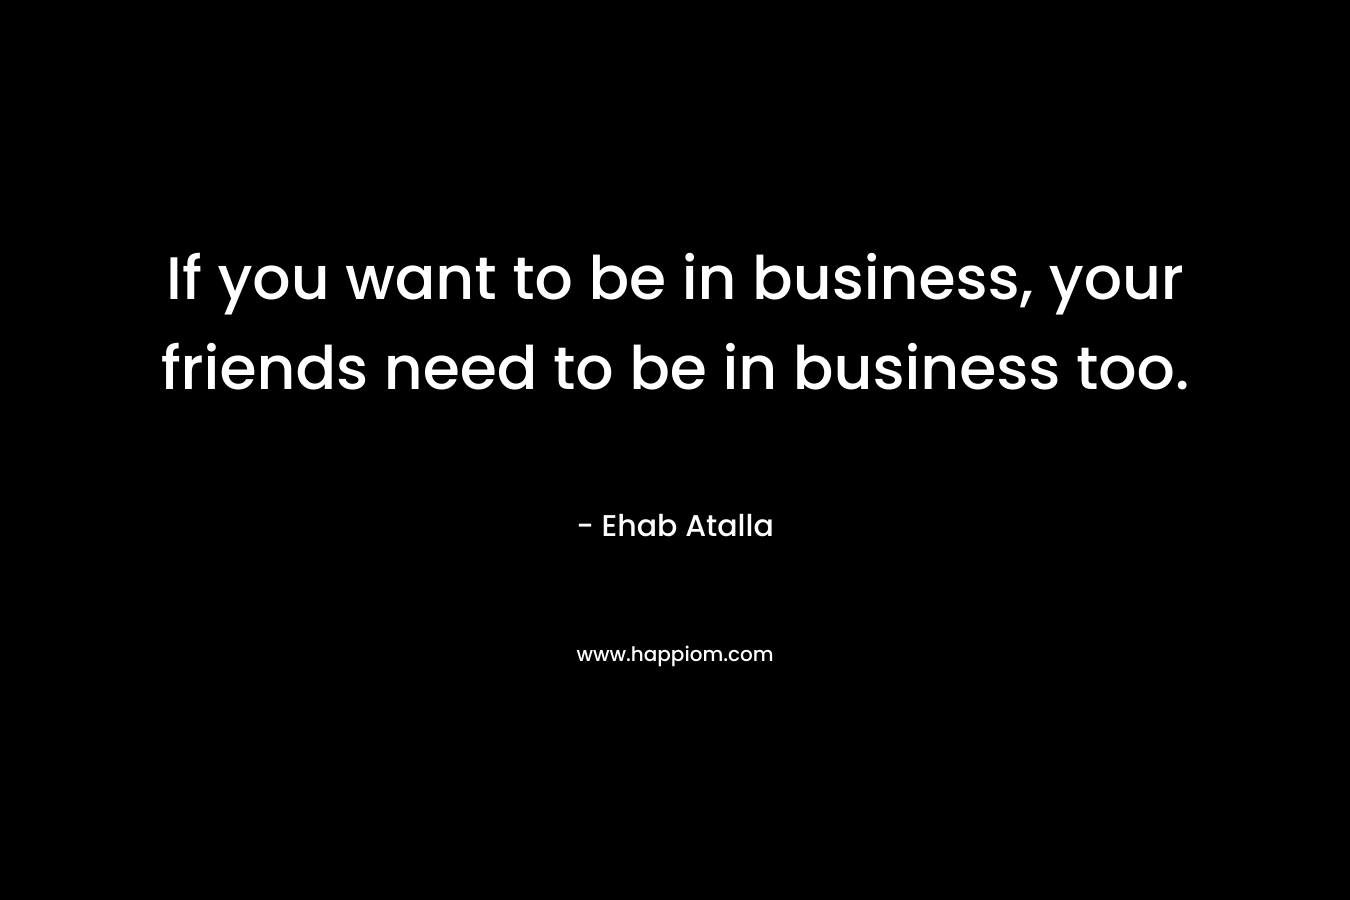 If you want to be in business, your friends need to be in business too.